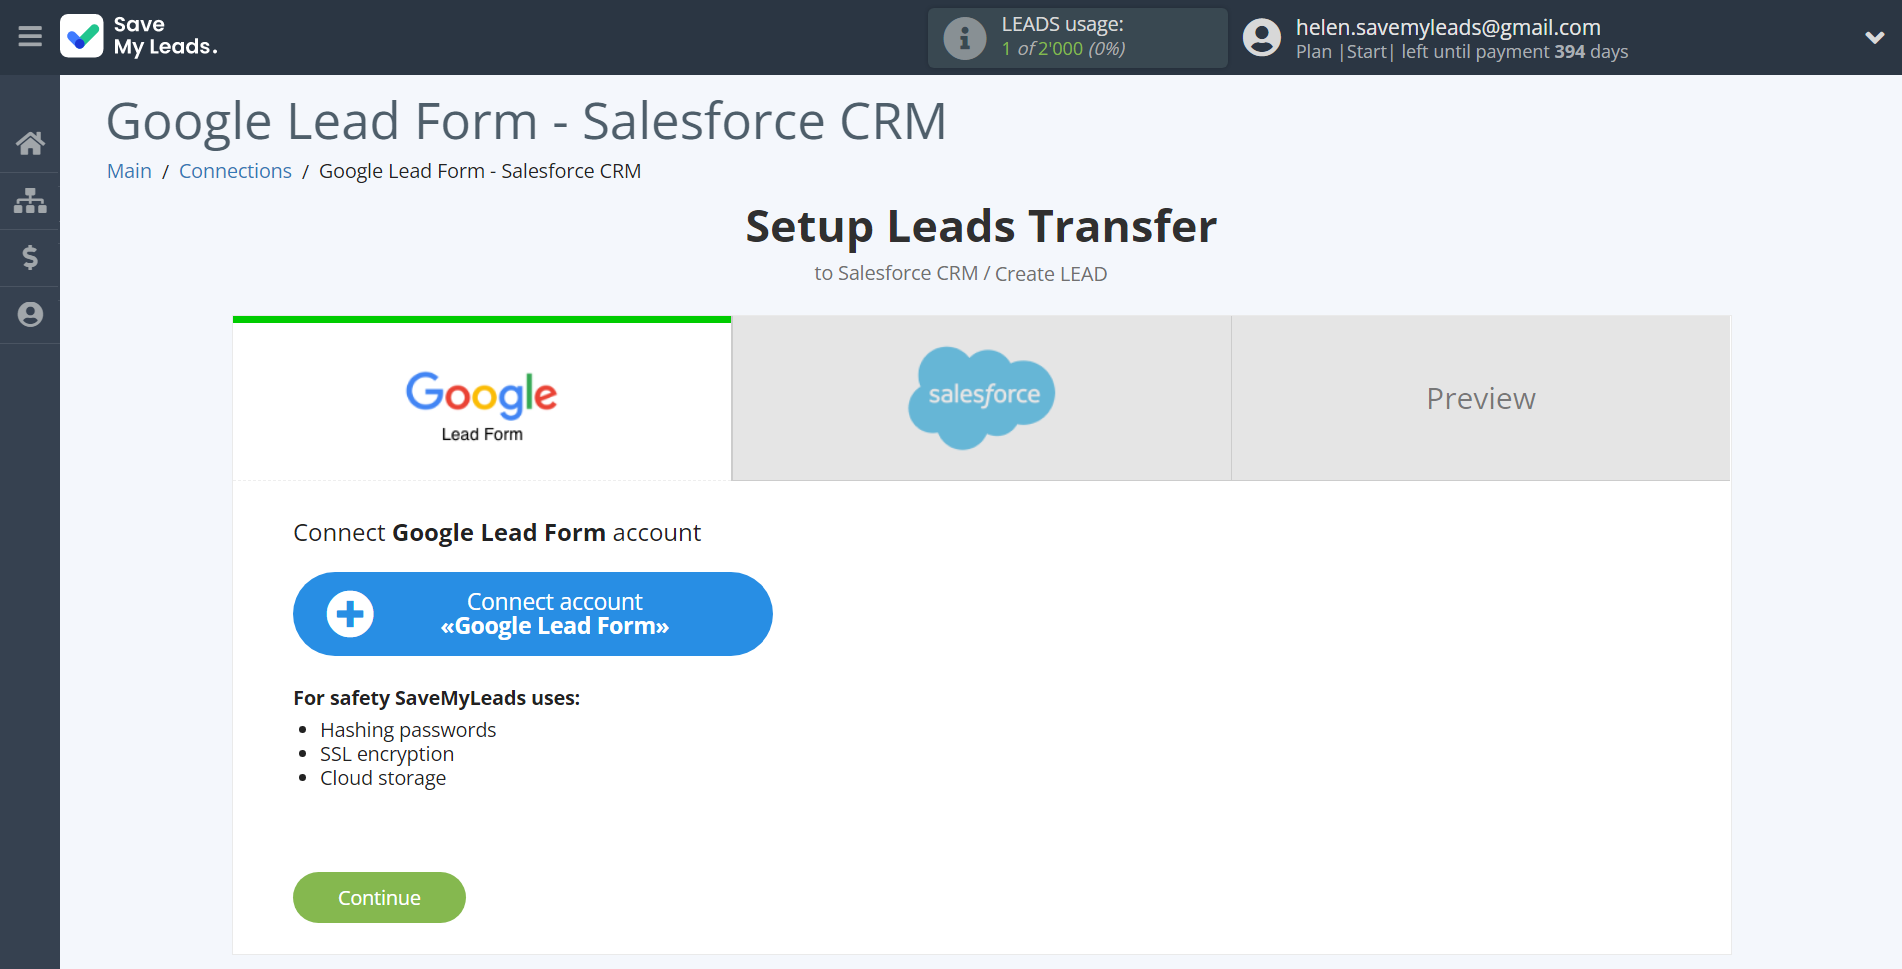 How to Connect Google Lead Form with Salesforce CRM Create Lead | Data Source account